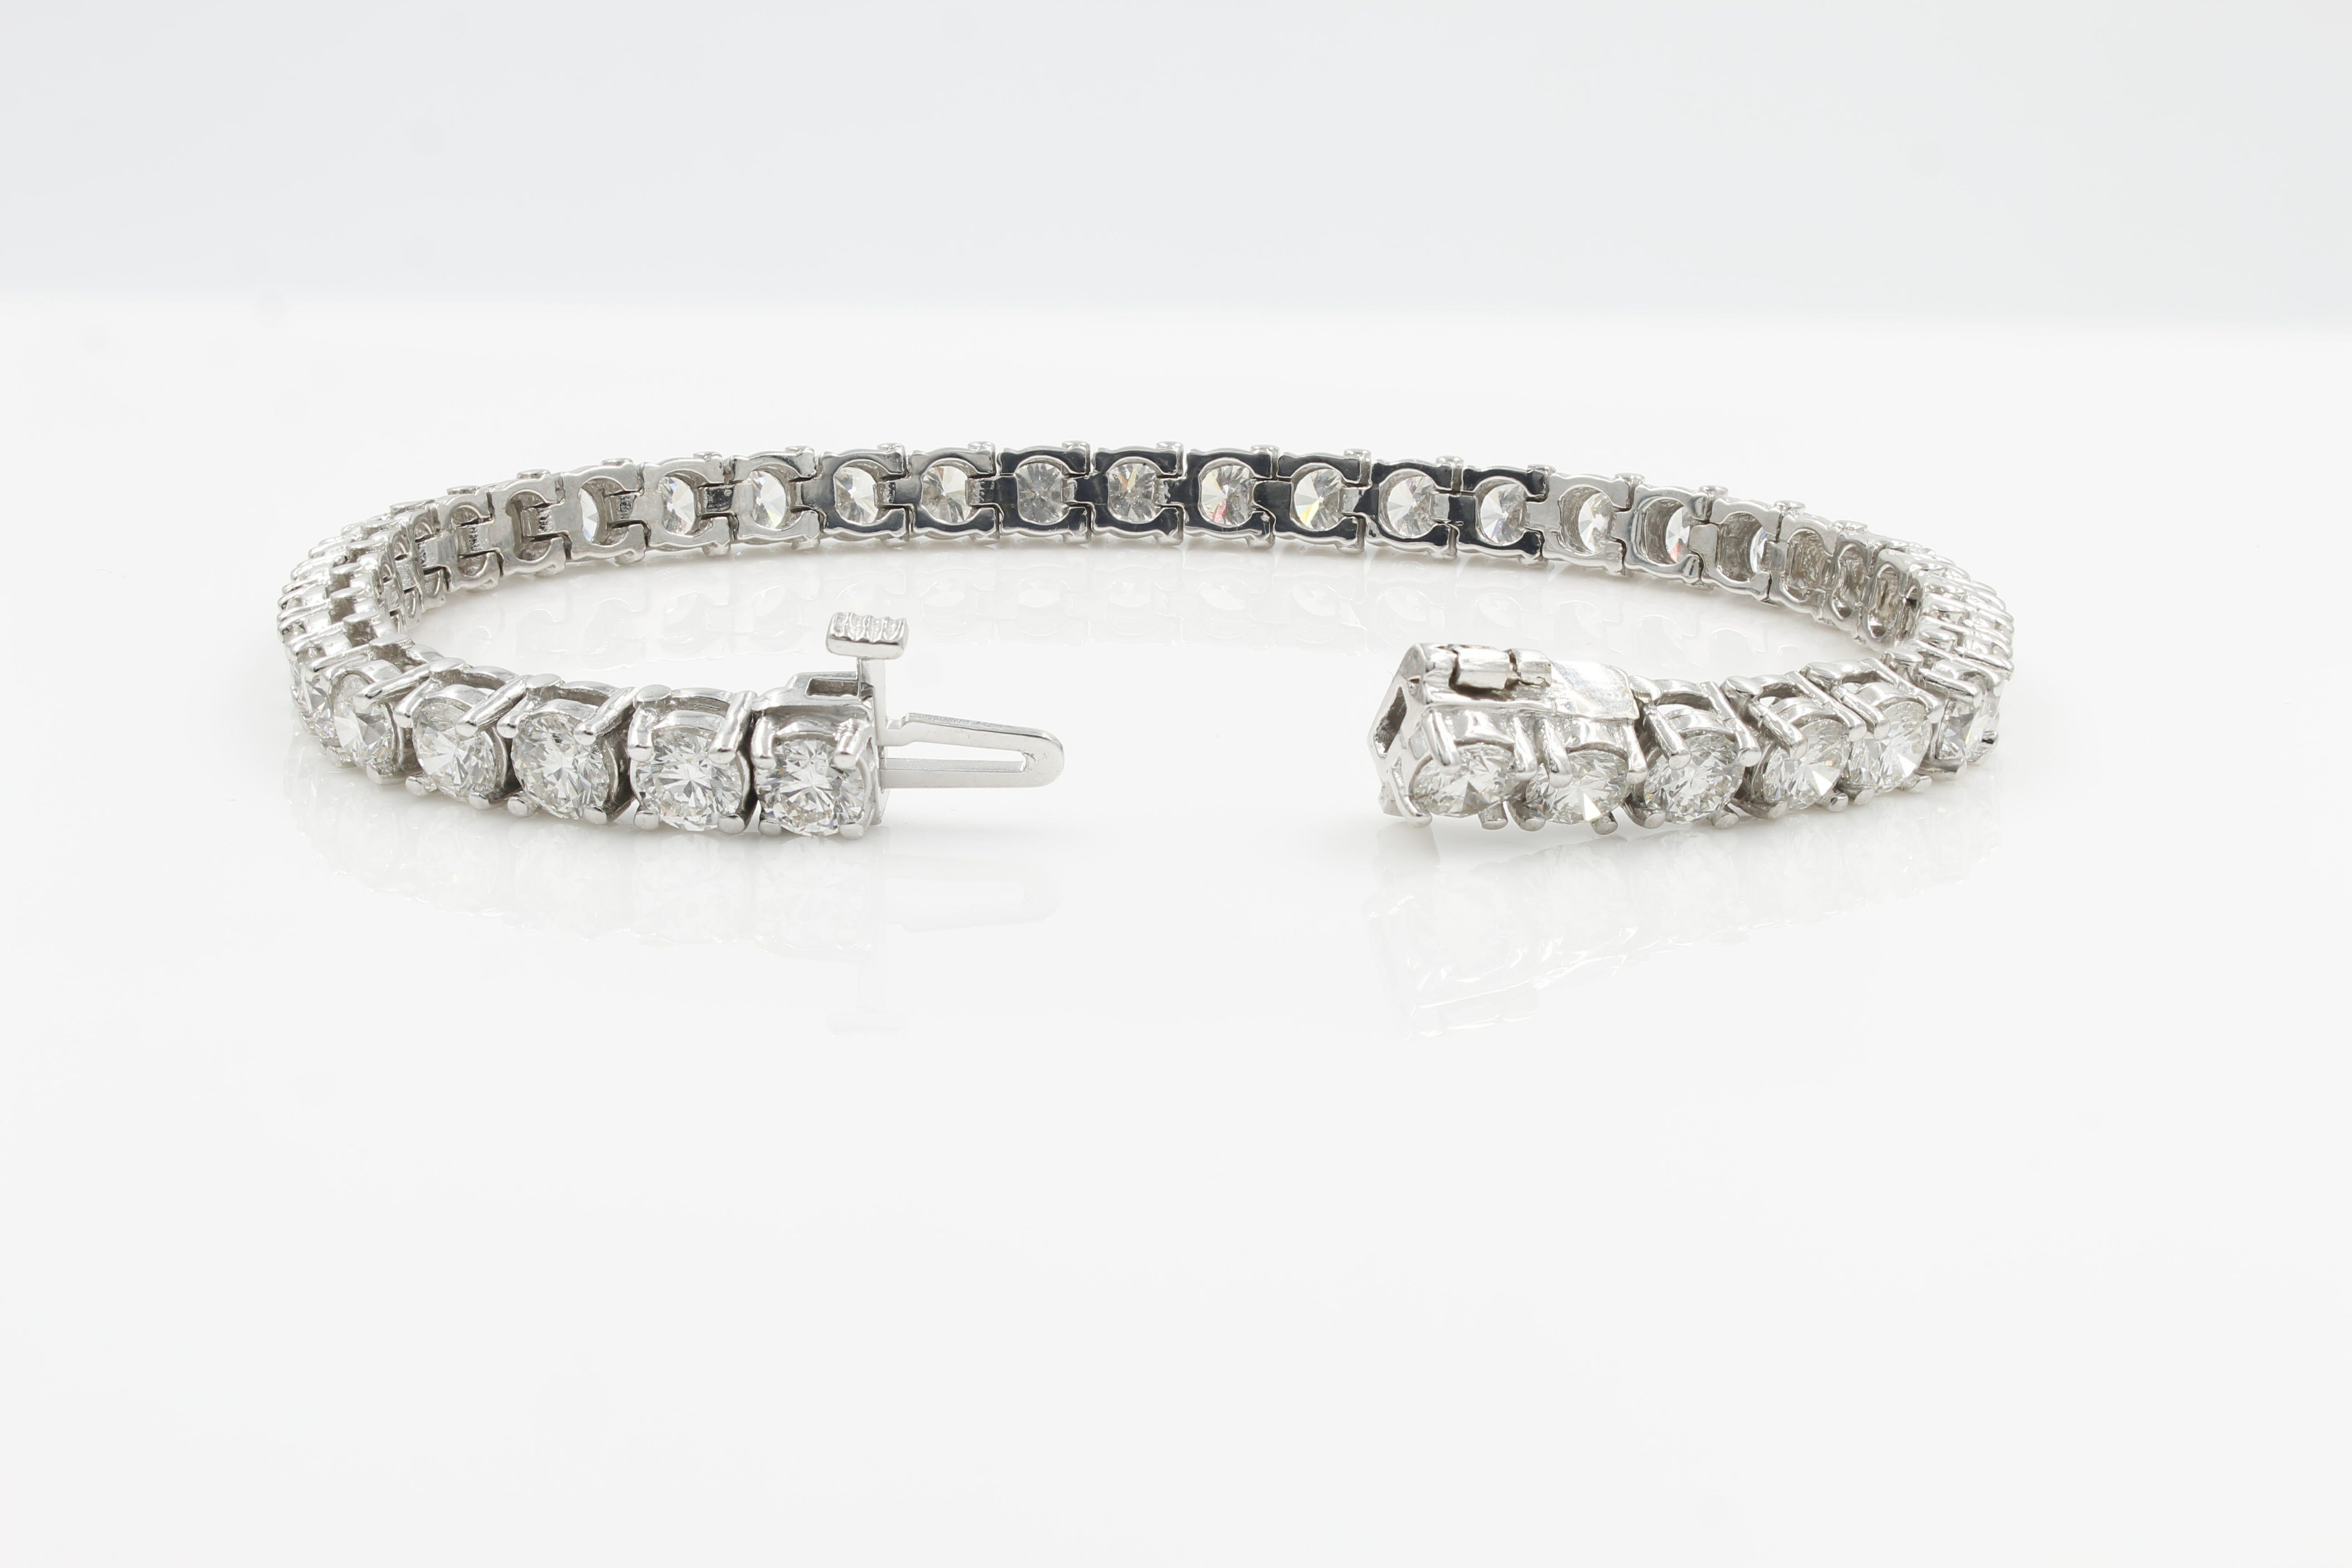 Classic Diamond Tennis Bracelet. This stunning diamond bracelet is set with thirty-nine striking brilliant cut diamonds weighing a total carat weight of 9.75ct. Hallmarked 14K white gold four prong setting with safety clasp and measures 7 inches in